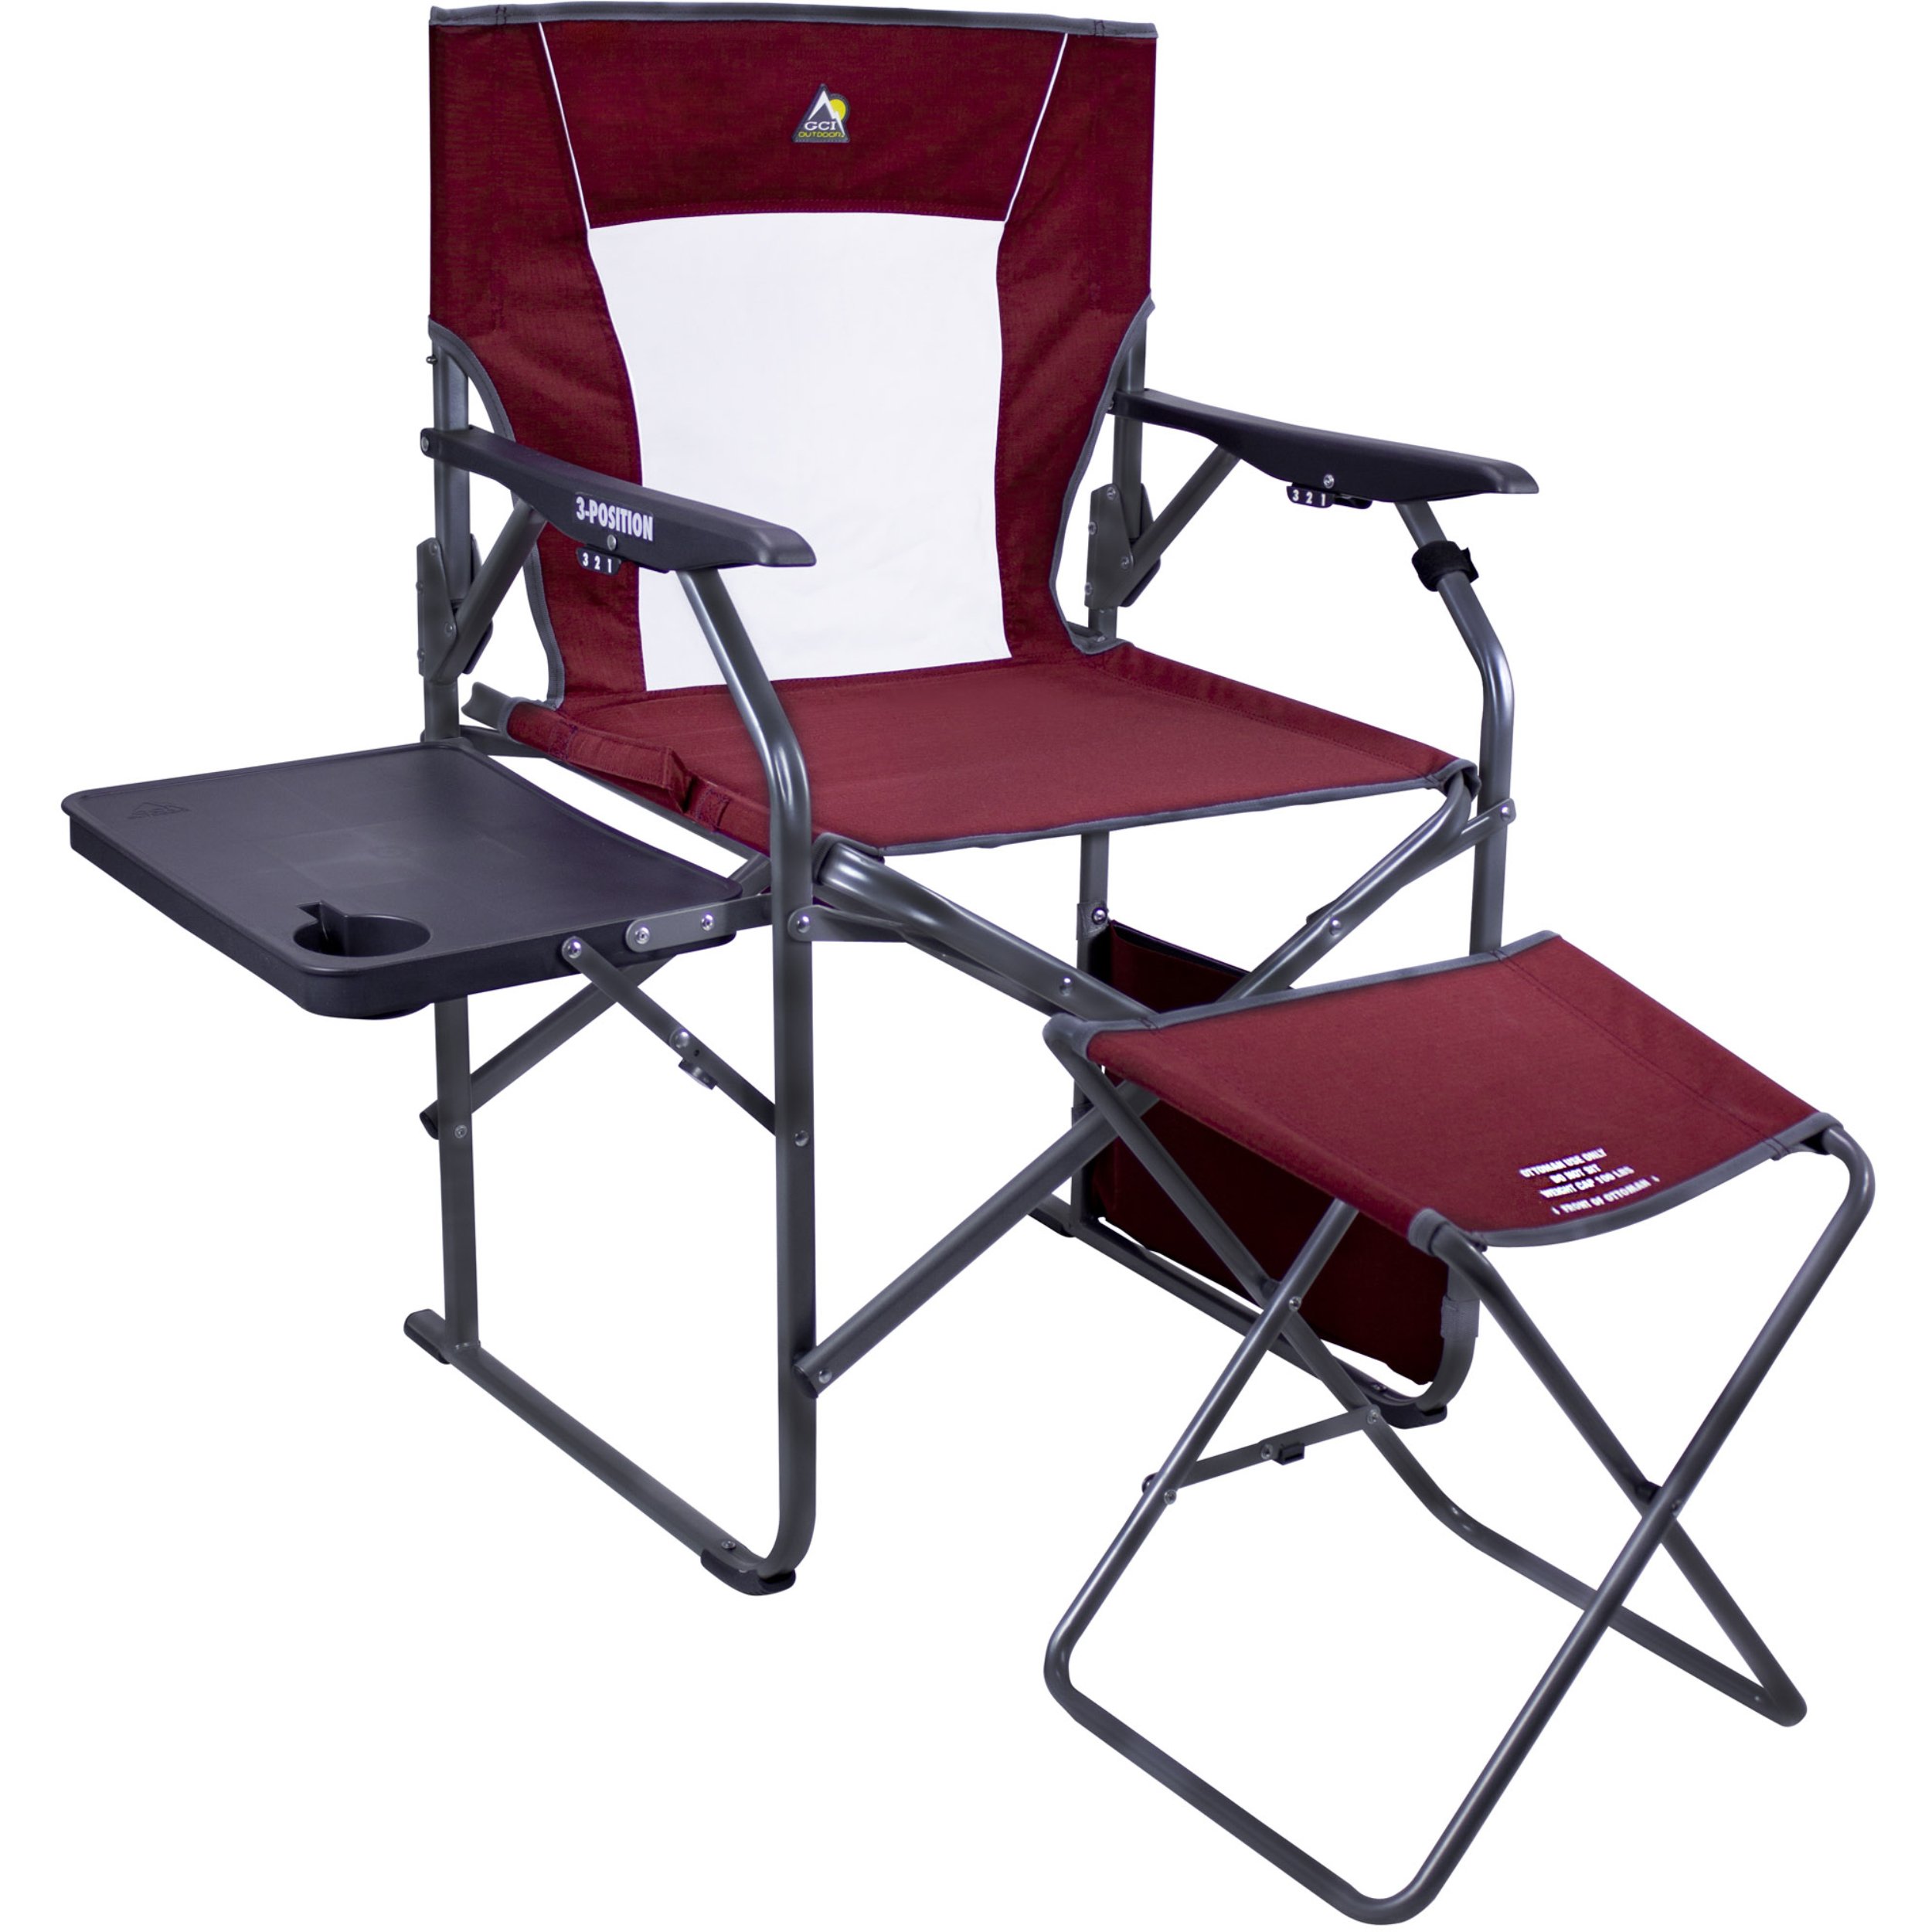 GCI Outdoor 3-Position Reclining Director's Camping Chair $62.30 + Free Shipping